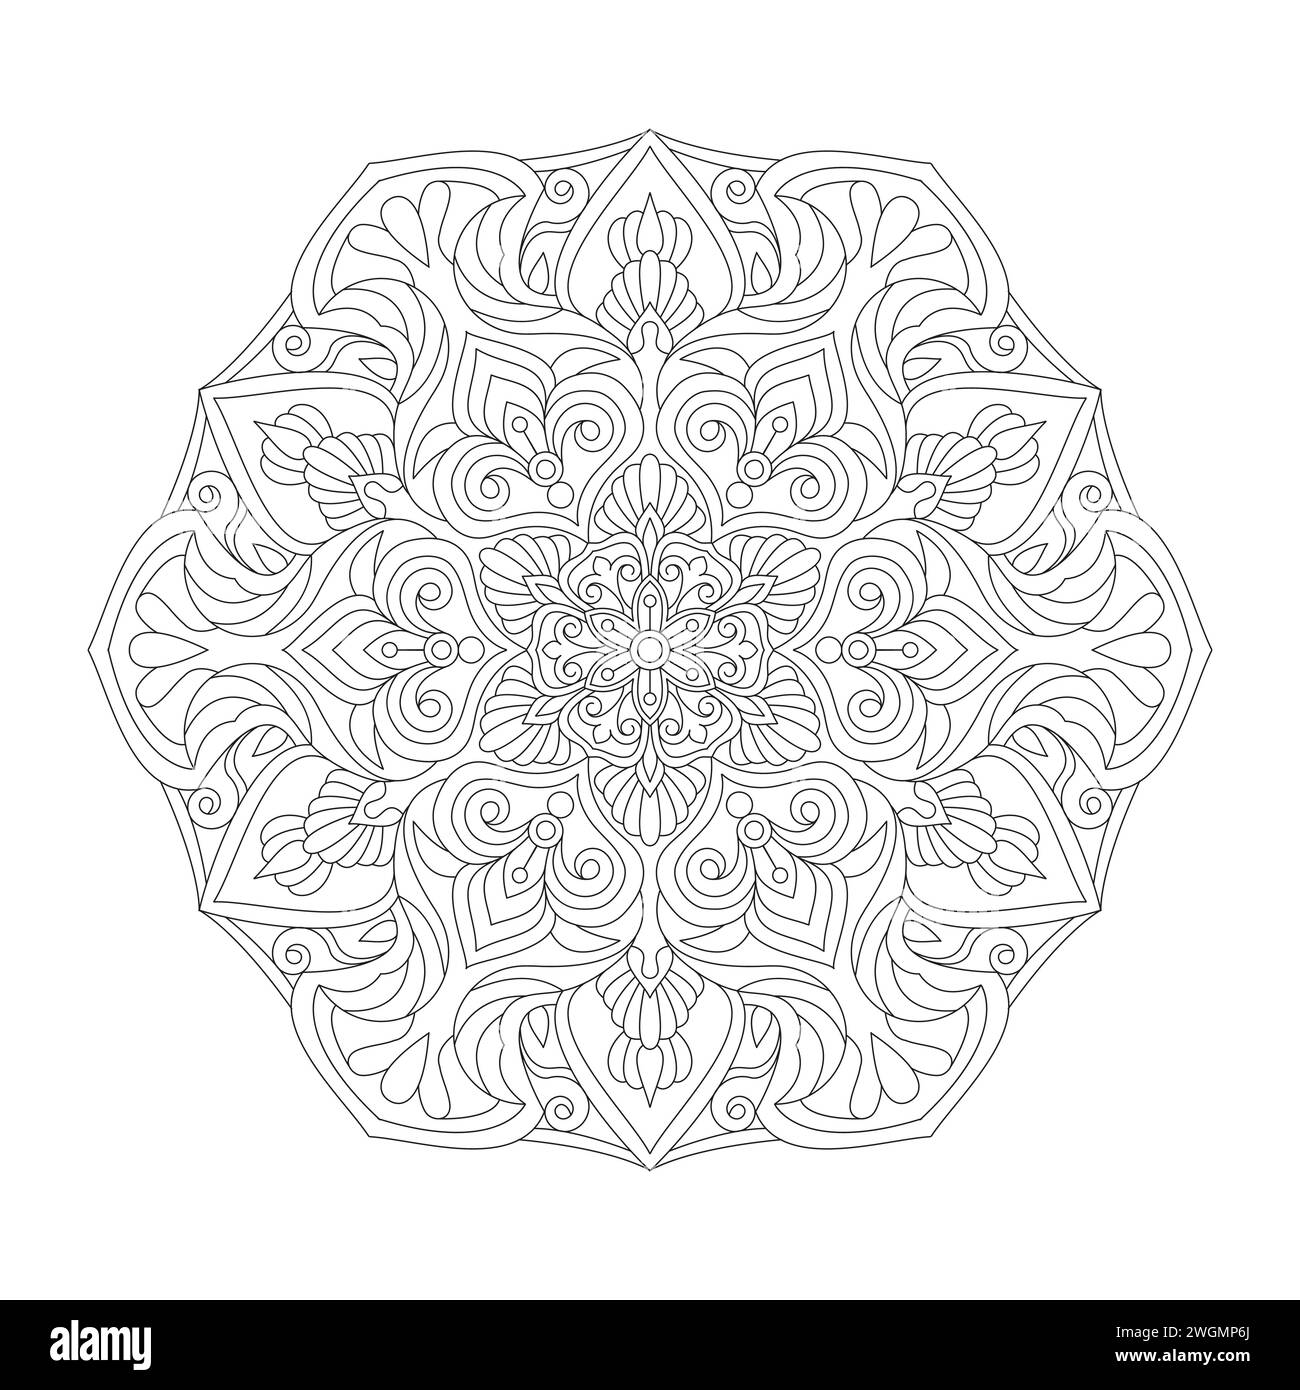 Attractive Decorative Mandala Colouring Book Page for KDP Book Interior. Peaceful Petals, Ability to Relax, Brain Experiences, Harmonious Haven, Stock Vector